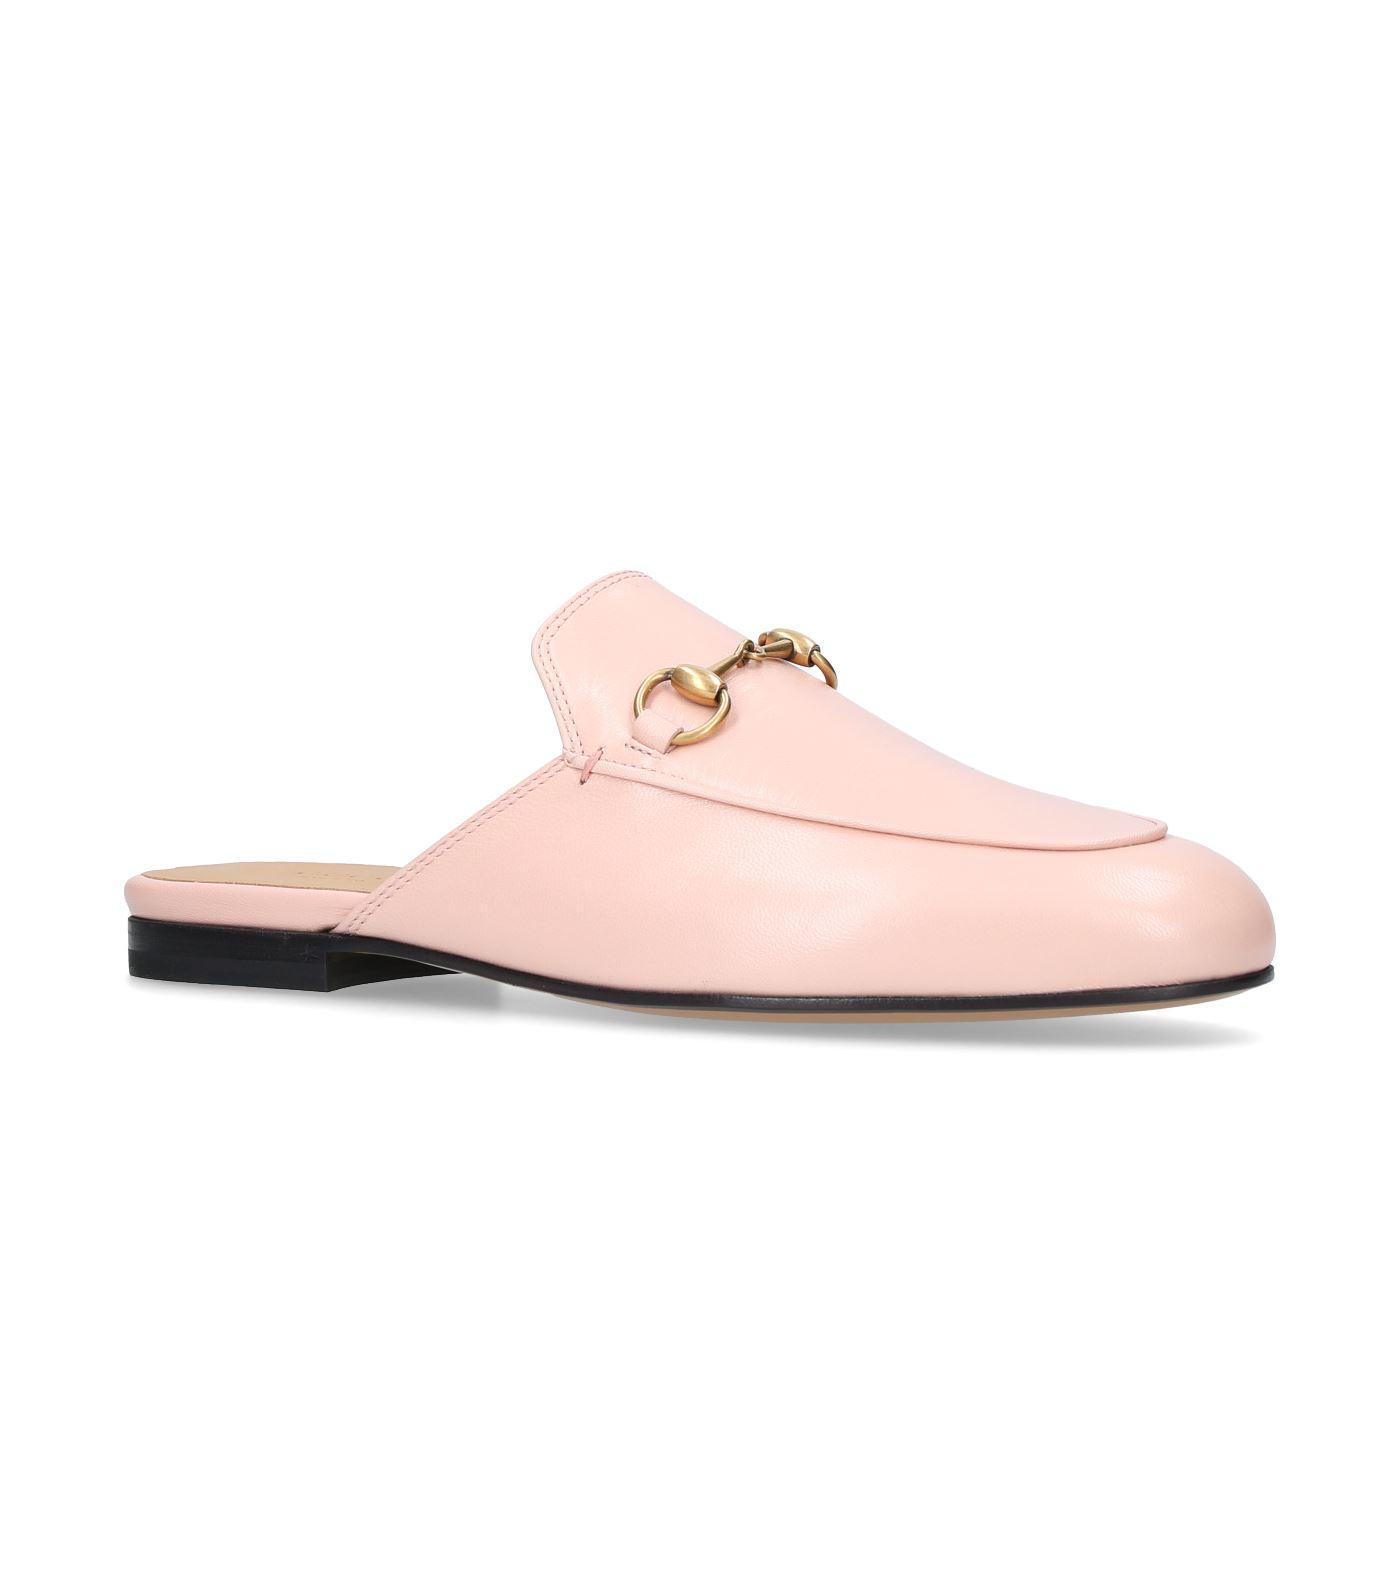 Gucci Leather Princetown Slippers in Pink - Lyst